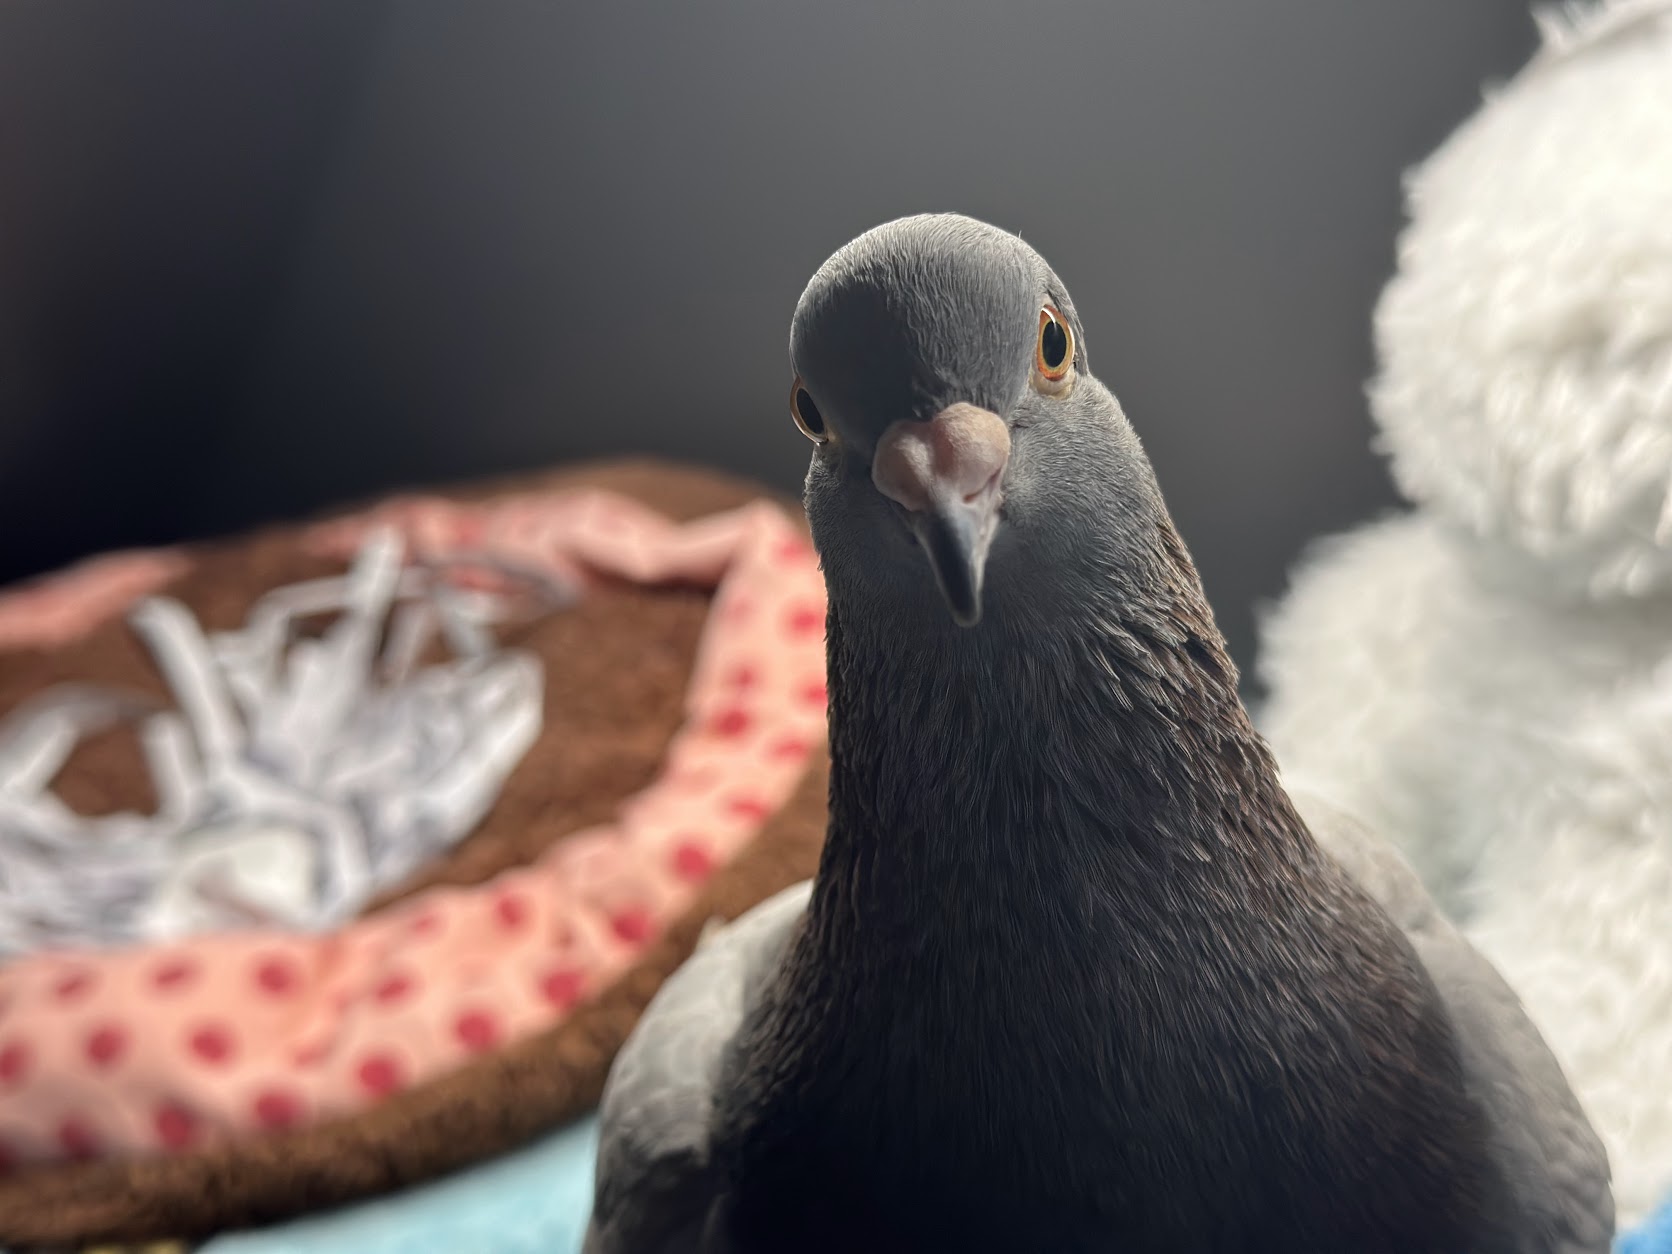 Why does a pigeon coo?